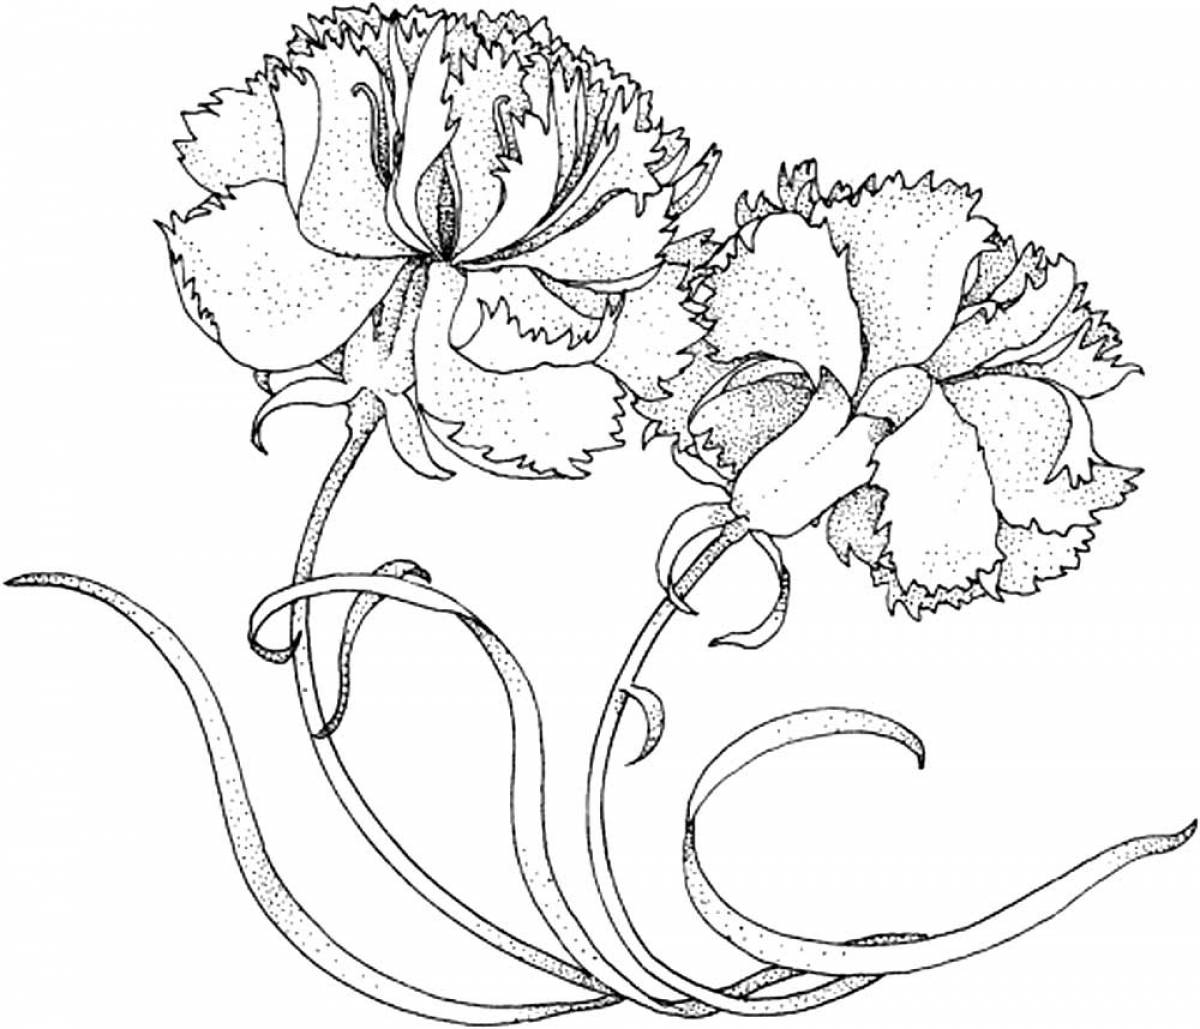 Carnation coloring page